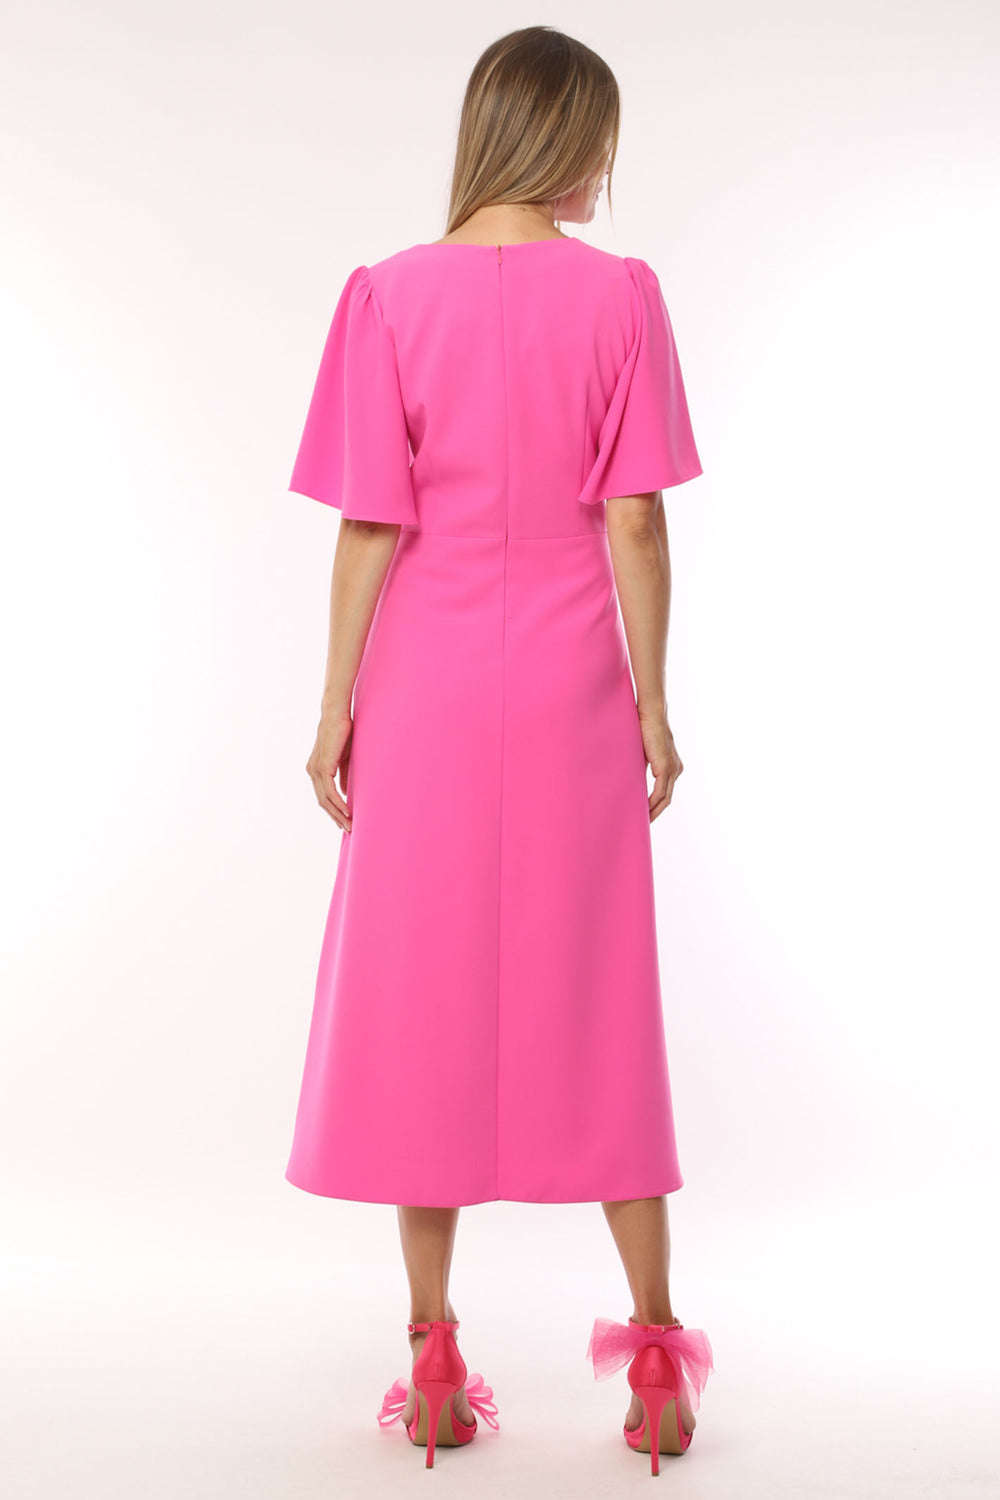 Ella Boo 2309-40 Pink V-Neck Bell Sleeve Midi Occasion Dress - Rouge Boutique Inverness